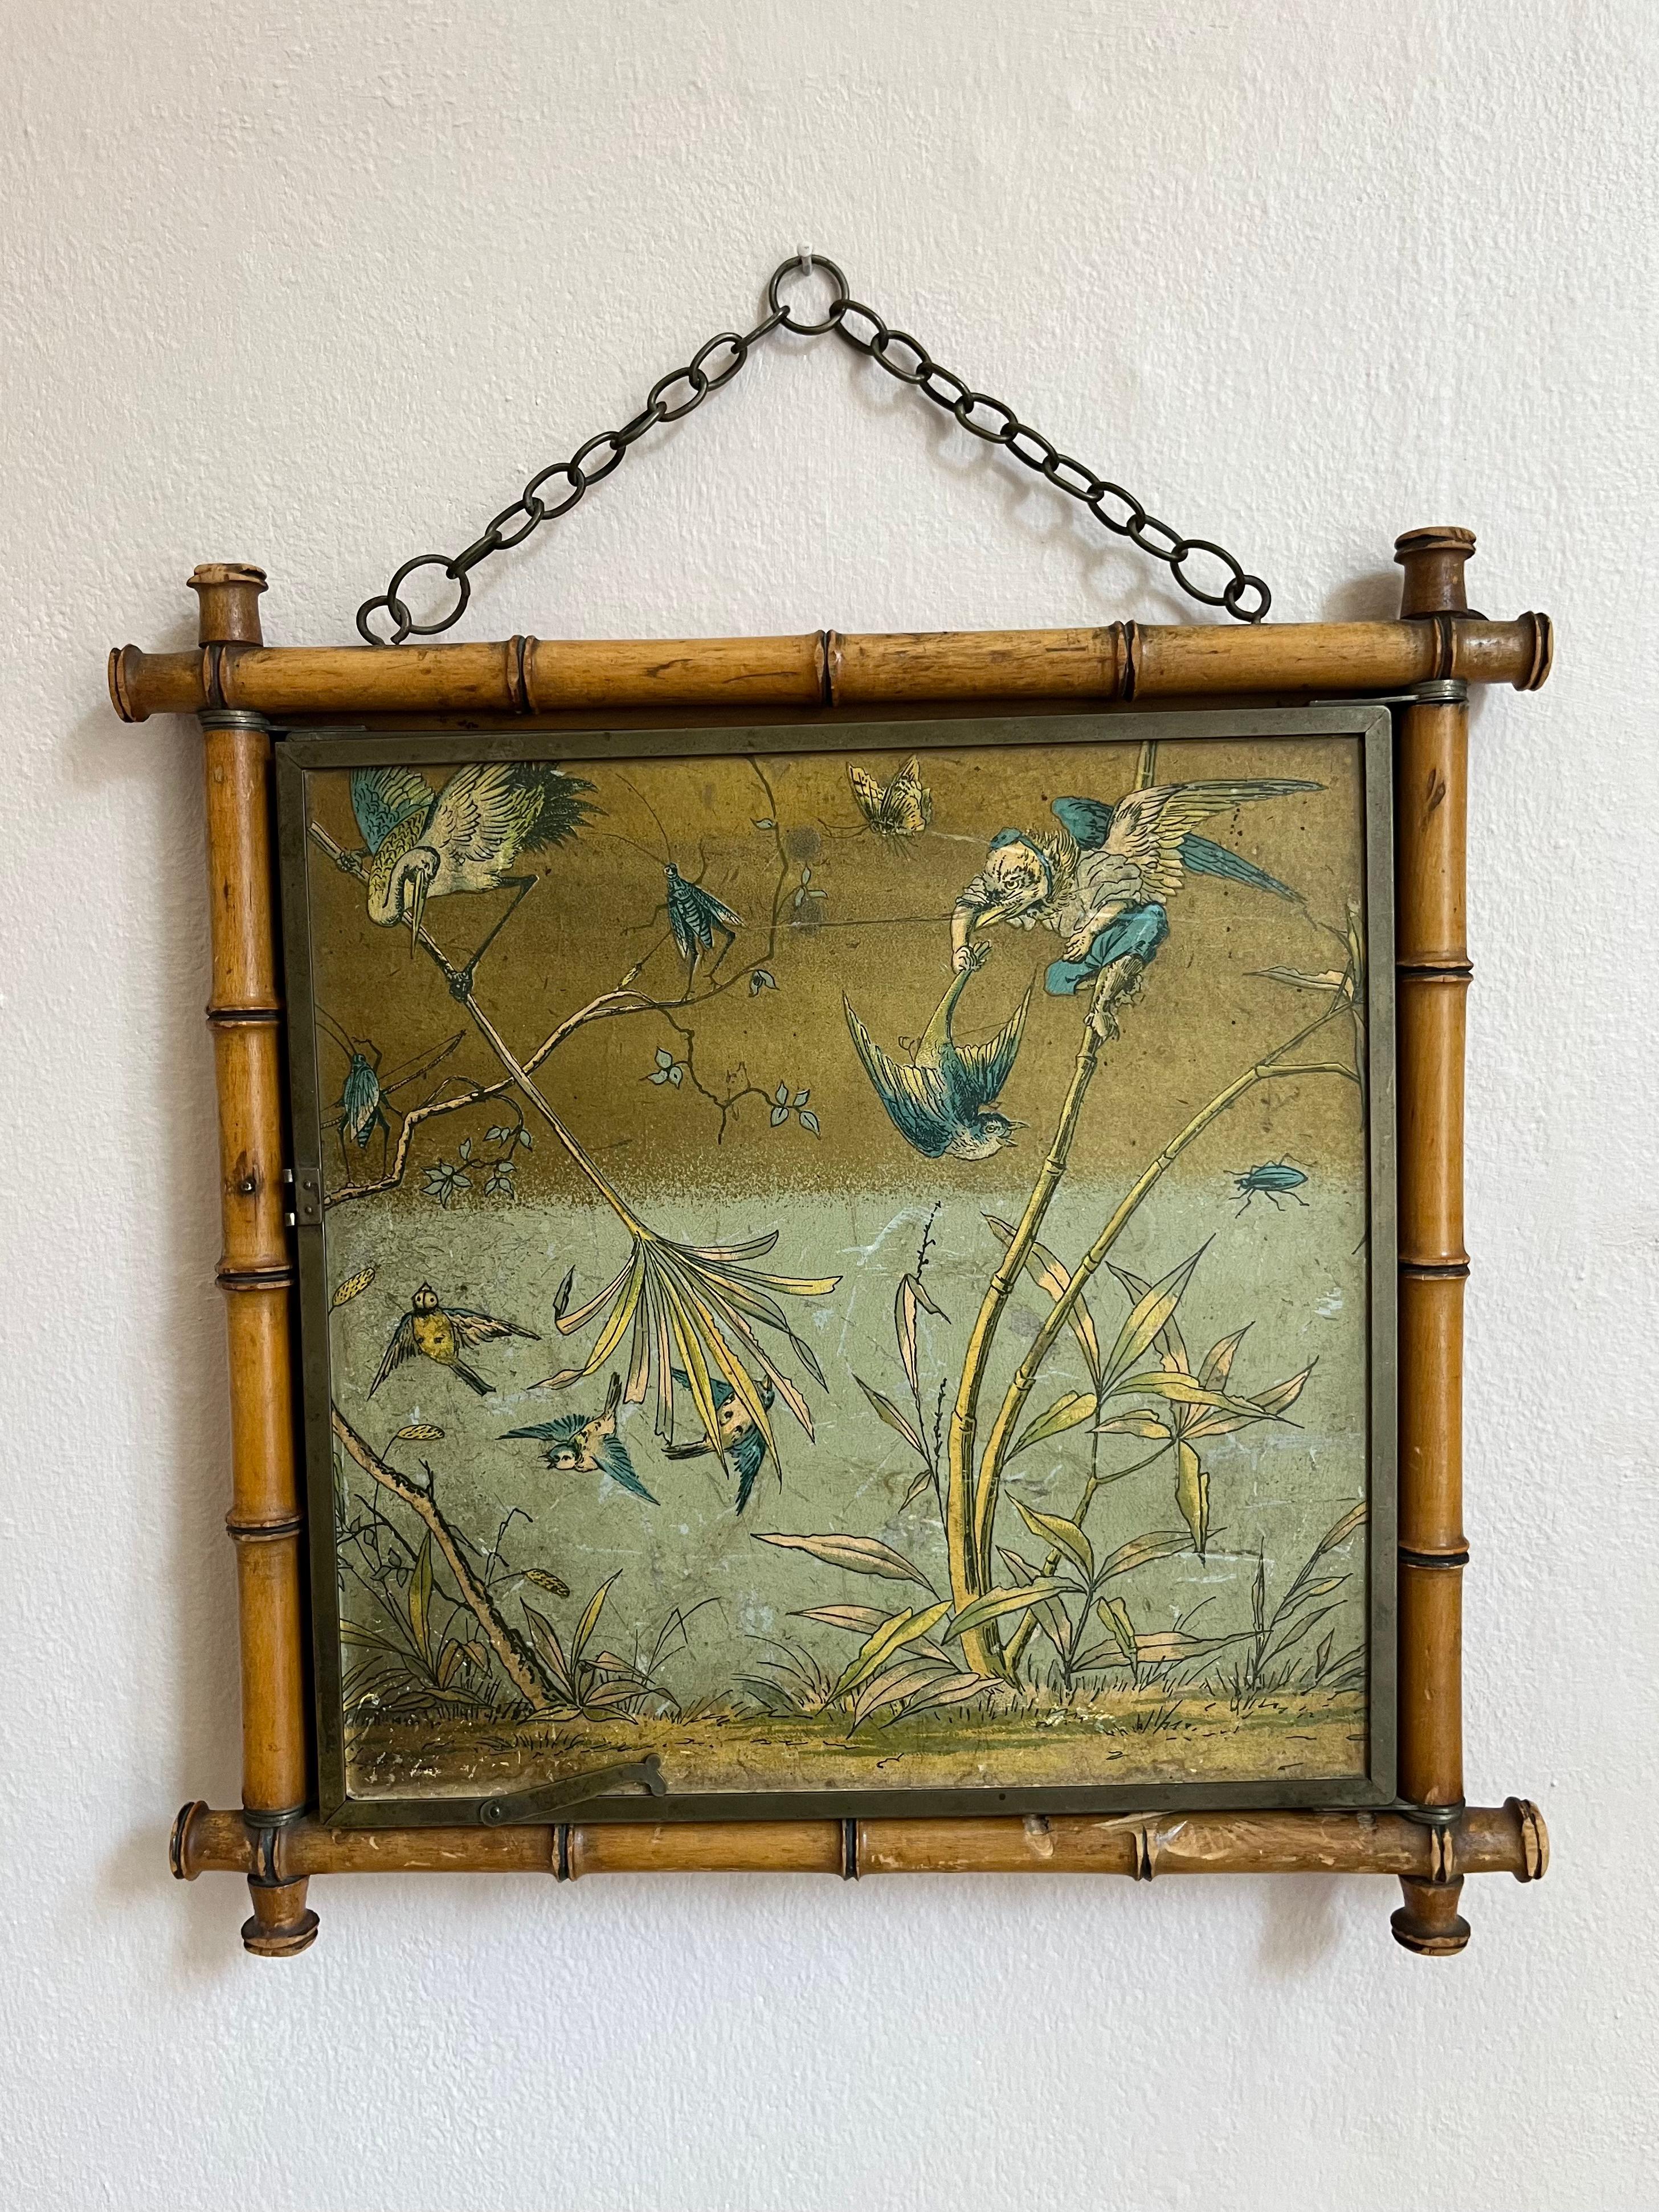 Antique Peter Wiederer & Brothers tri-fold shaving mirror with decorative birds For Sale 14